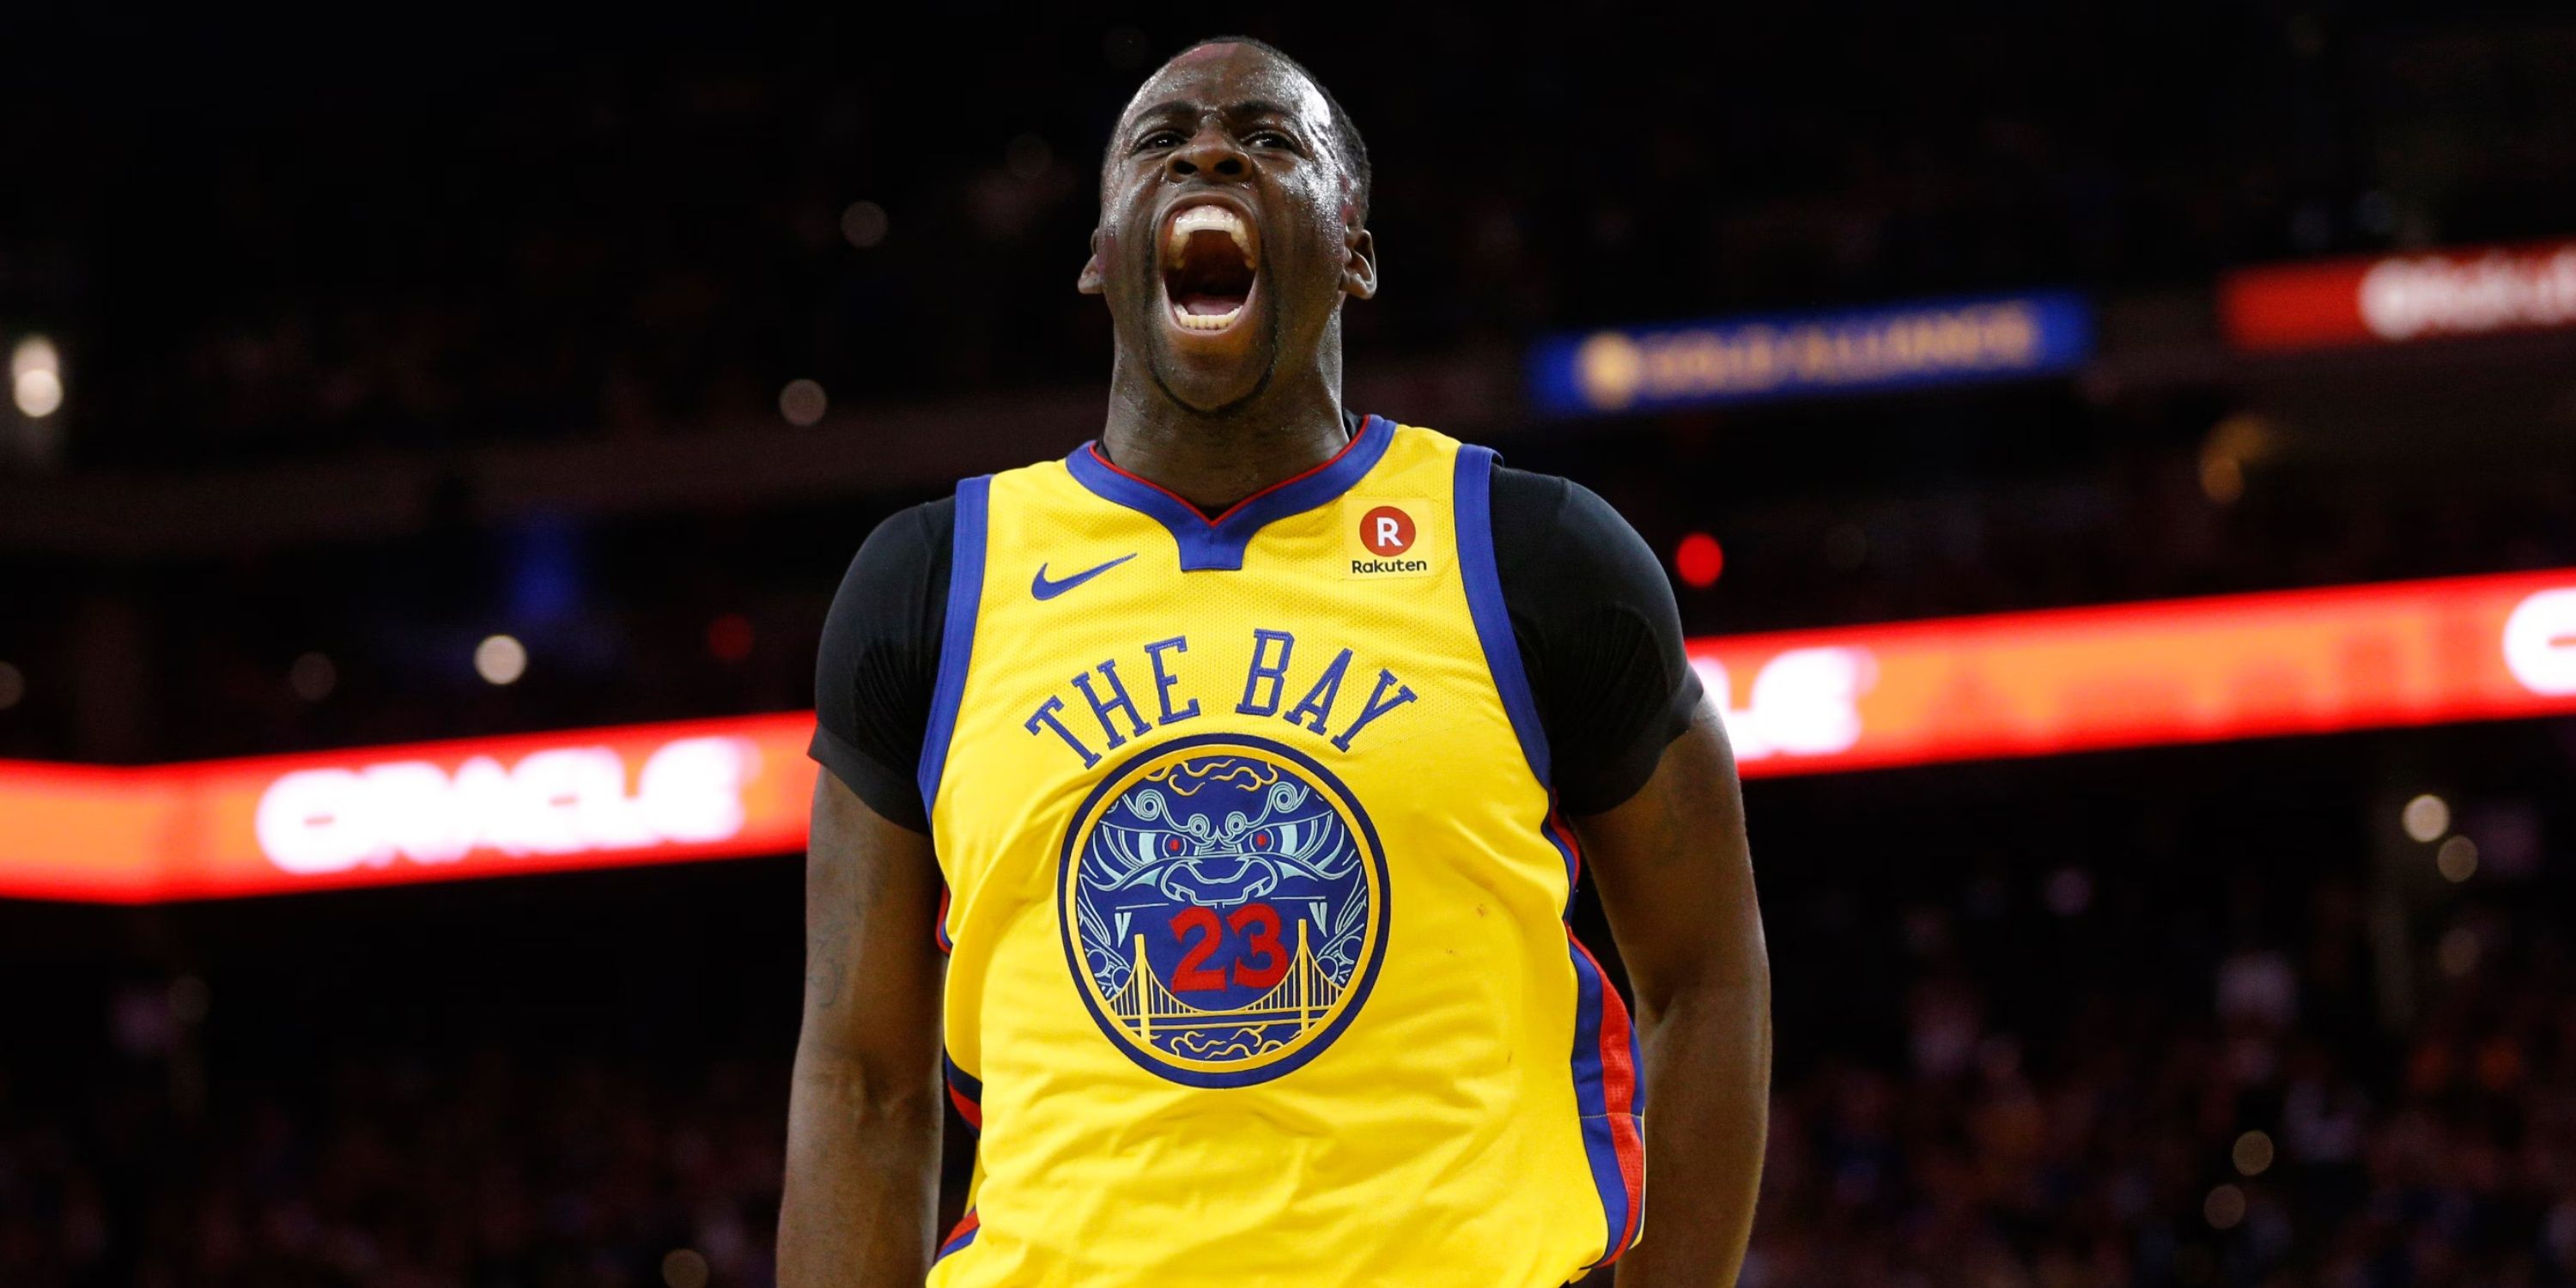 Draymond Green suspended indefinitely from NBA after striking Suns player